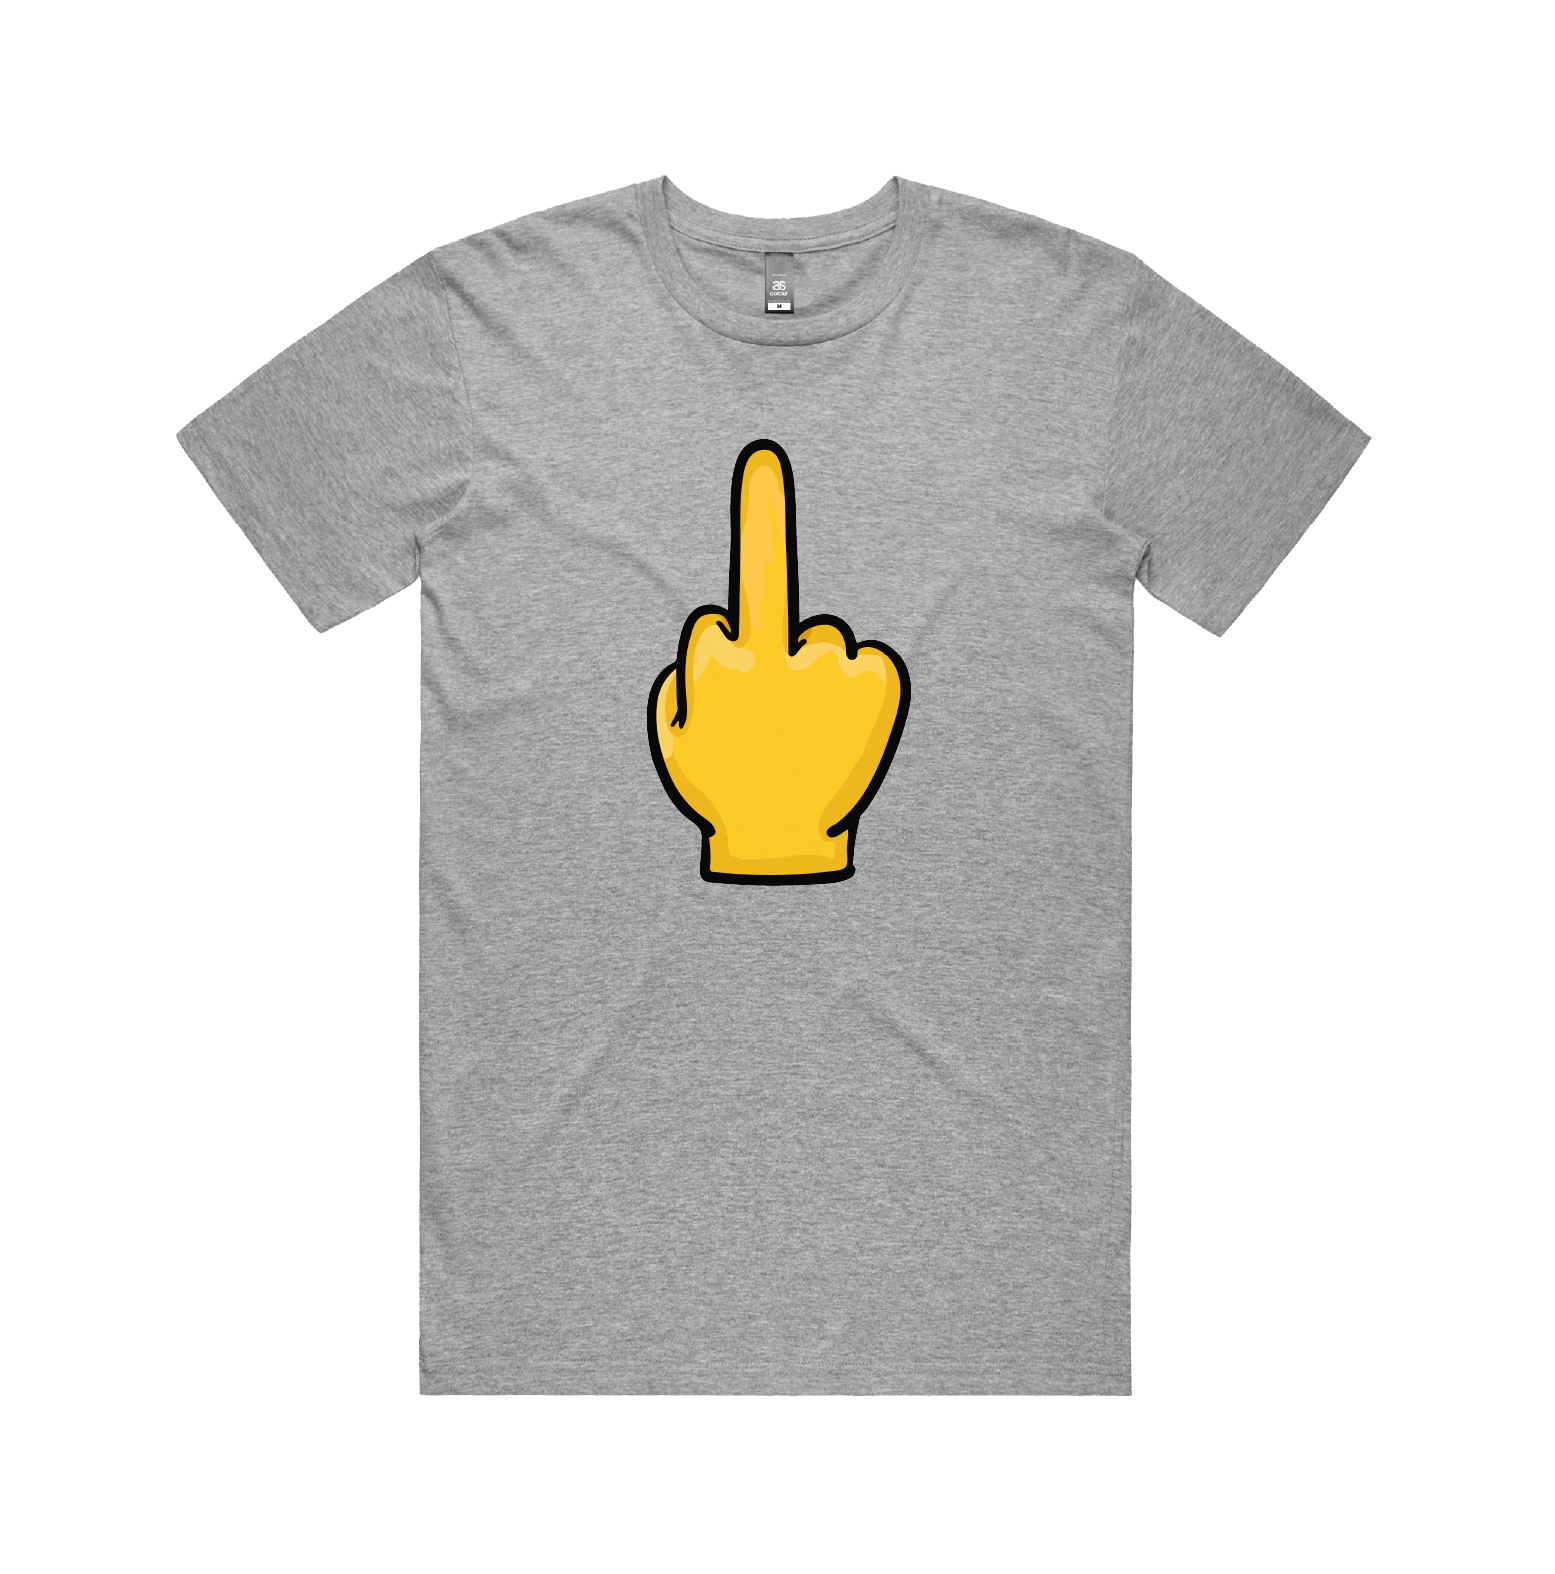 S / Grey / Large Front Design Up Yours 🖕 - Men's T Shirt